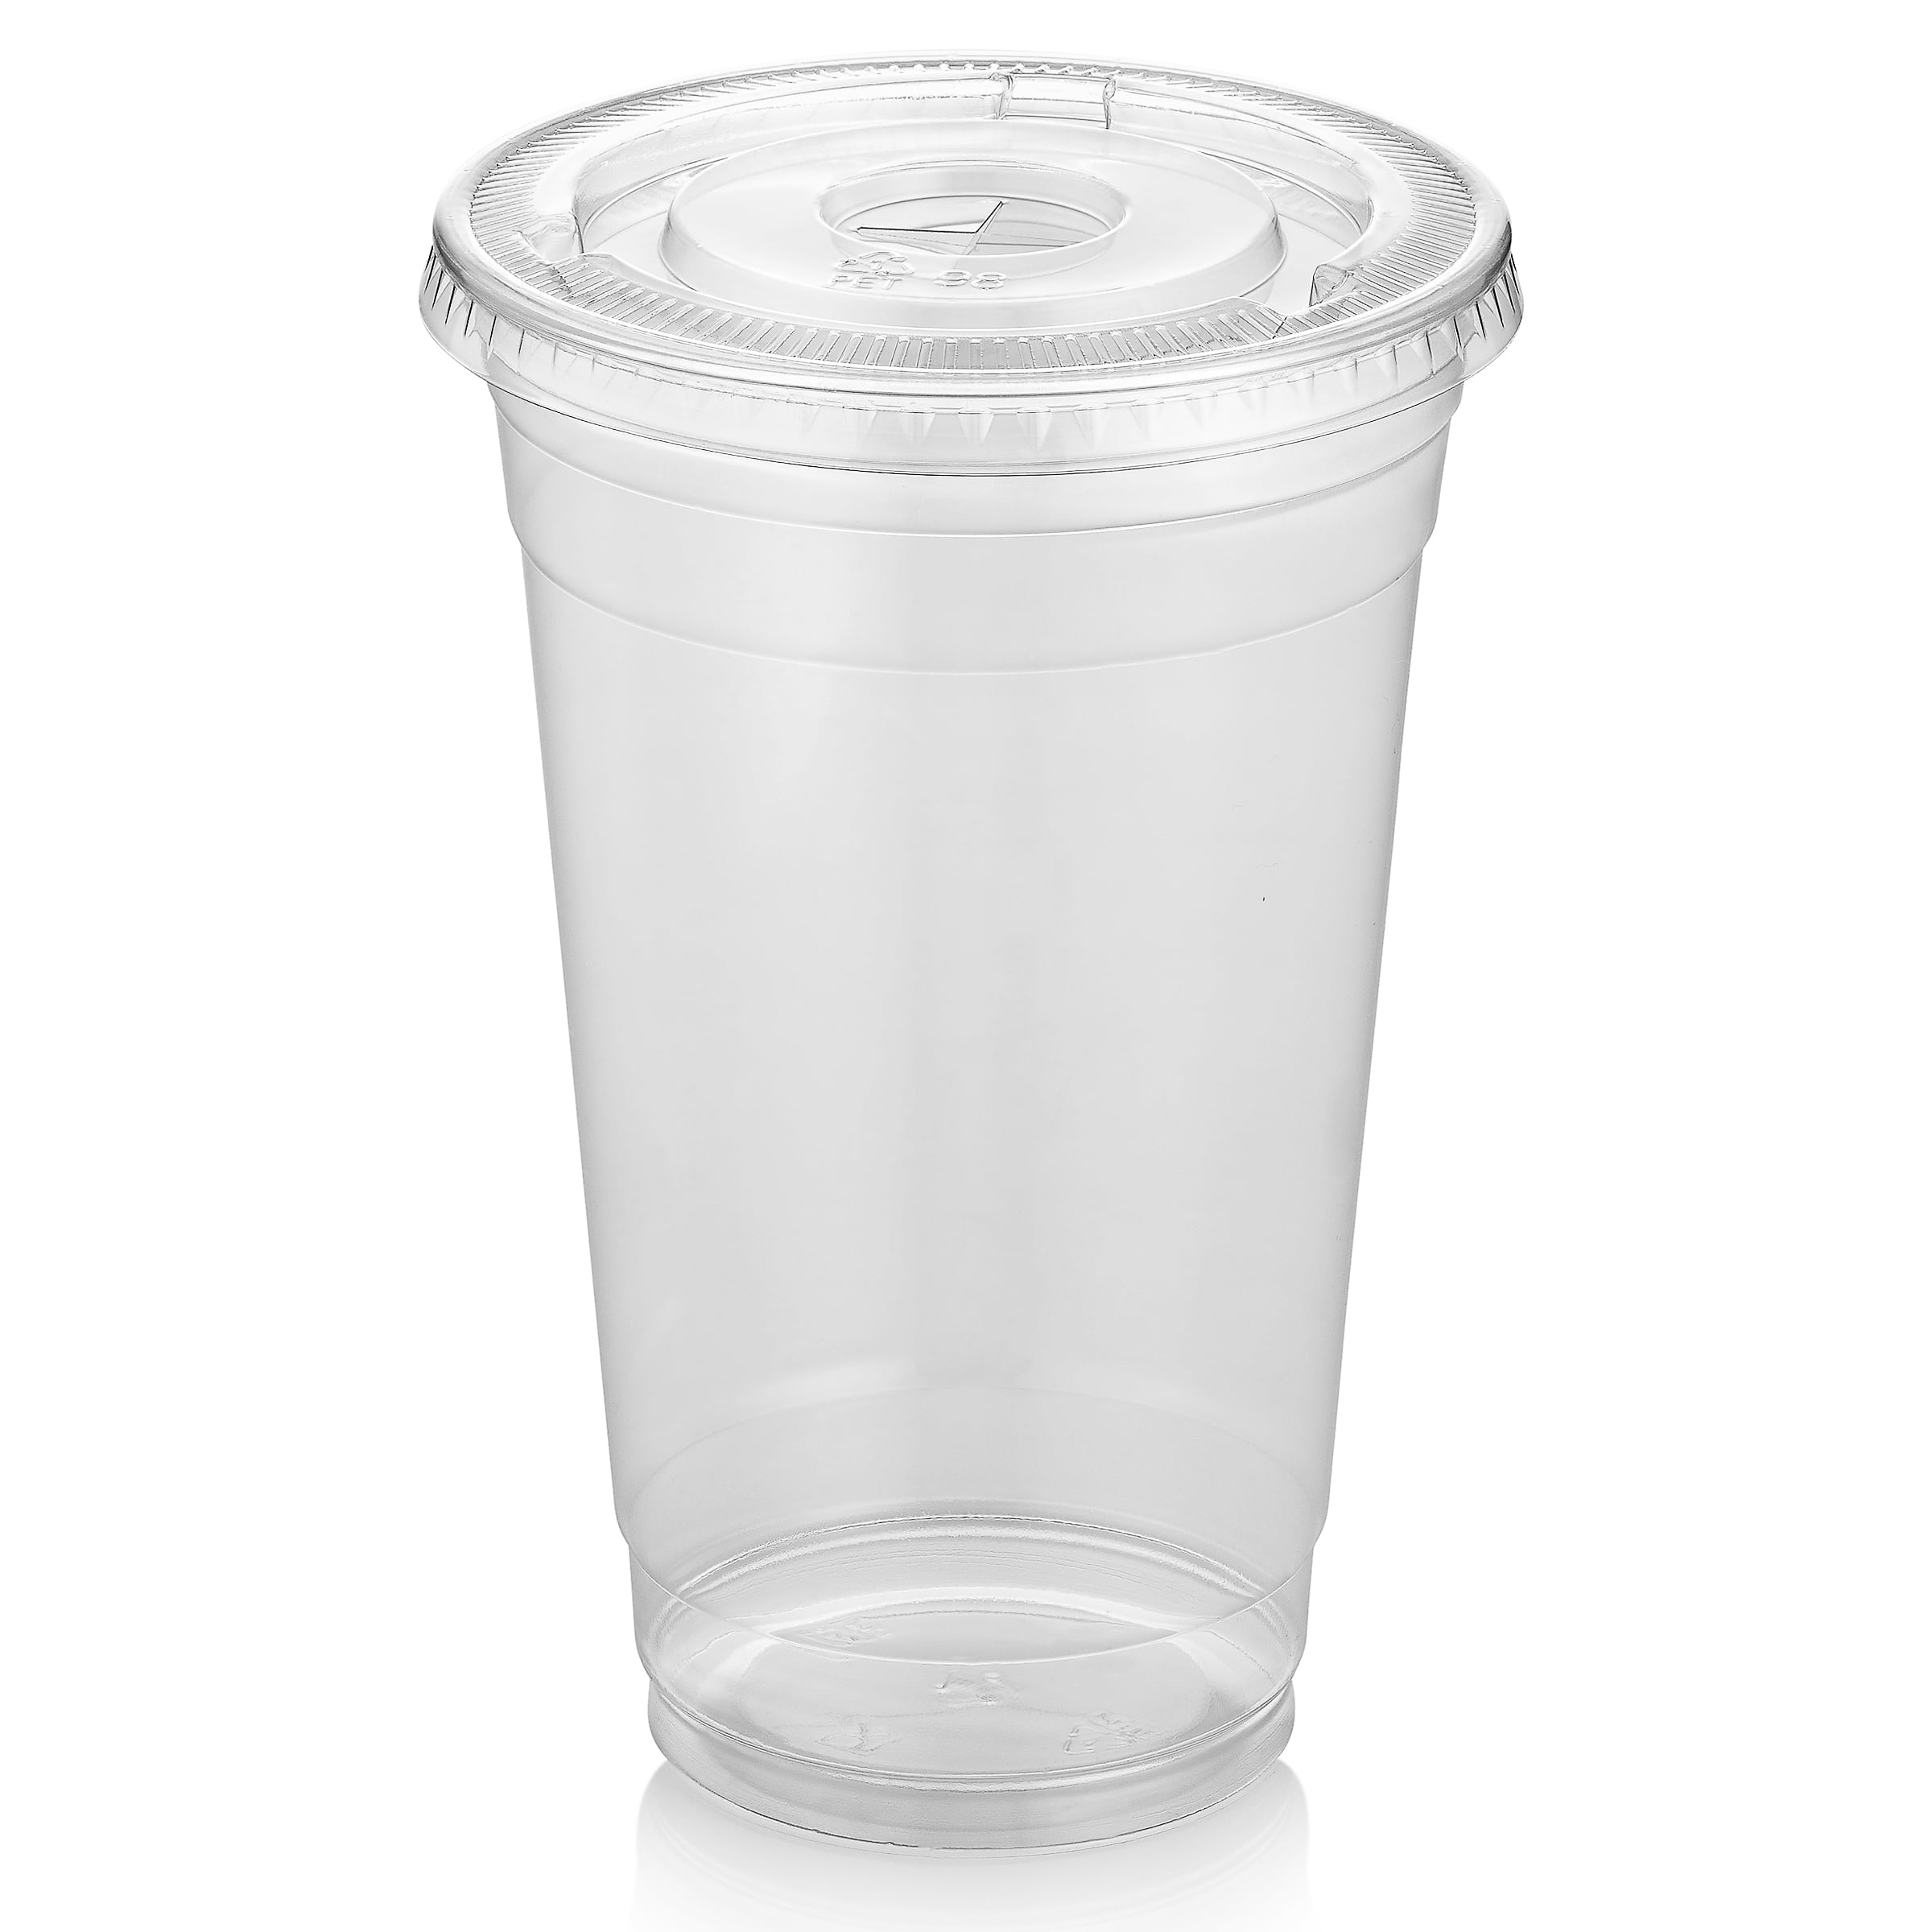 Spec101 To Go Smoothie Cup 50pk - 24oz Clear Plastic Cups with